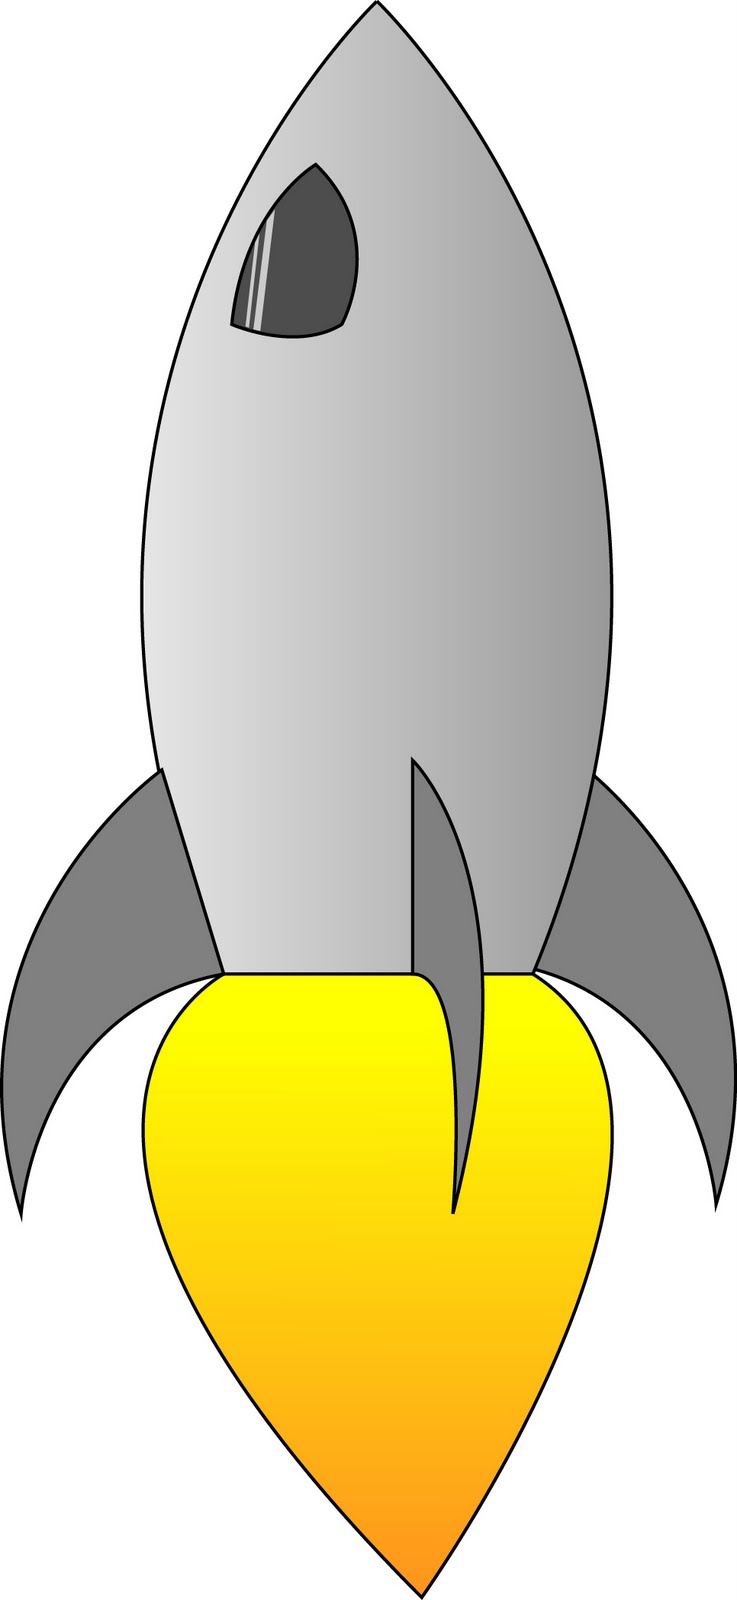 Free Space Ship Drawings, Download Free Space Ship Drawings png images